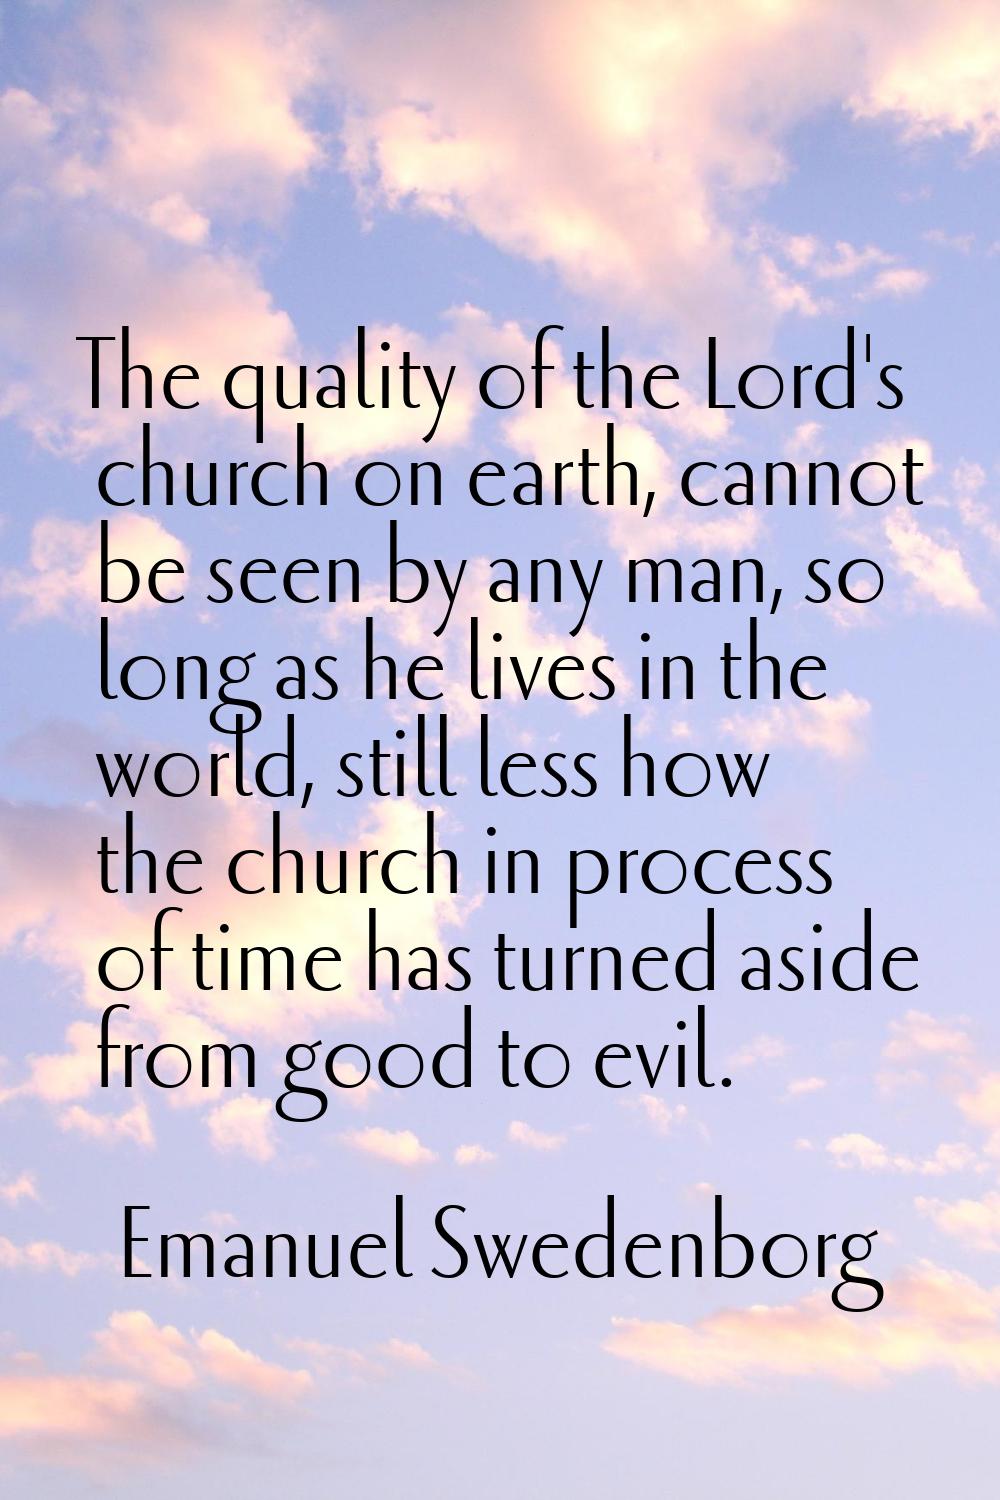 The quality of the Lord's church on earth, cannot be seen by any man, so long as he lives in the wo